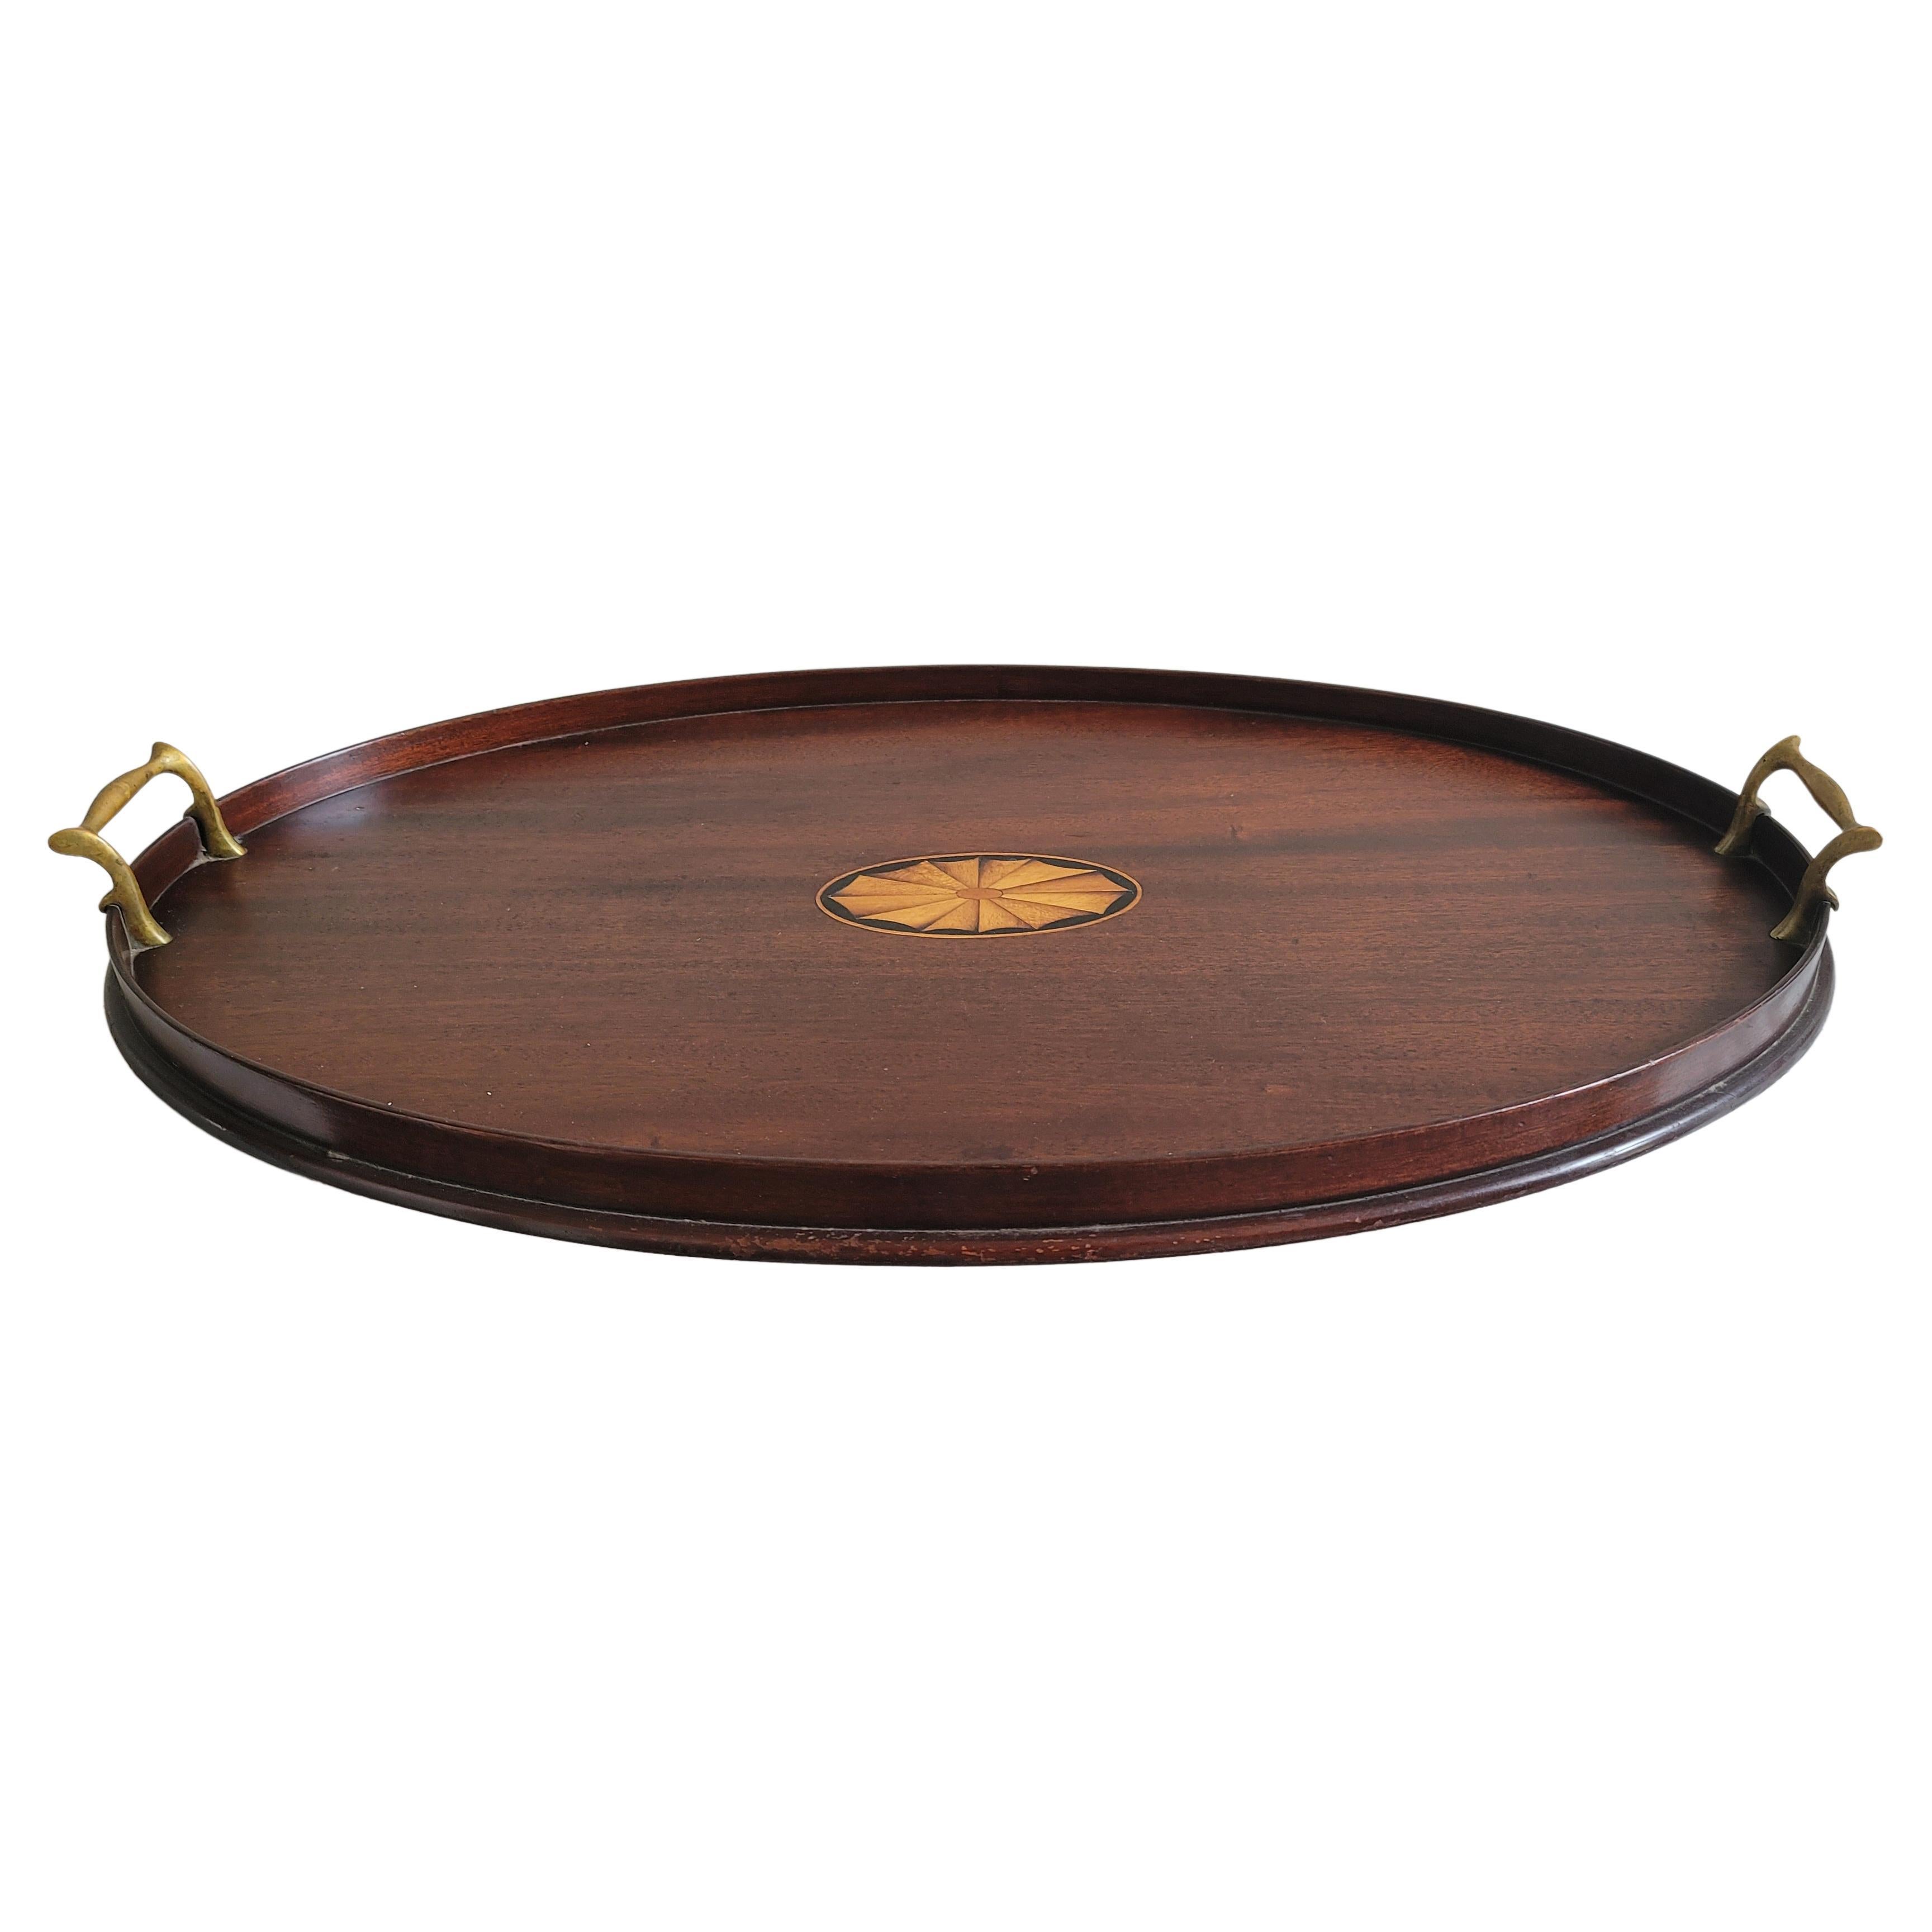 A Large, Finely Inlaid George III Victorian Mahogany Oval Butler's Tray For Sale